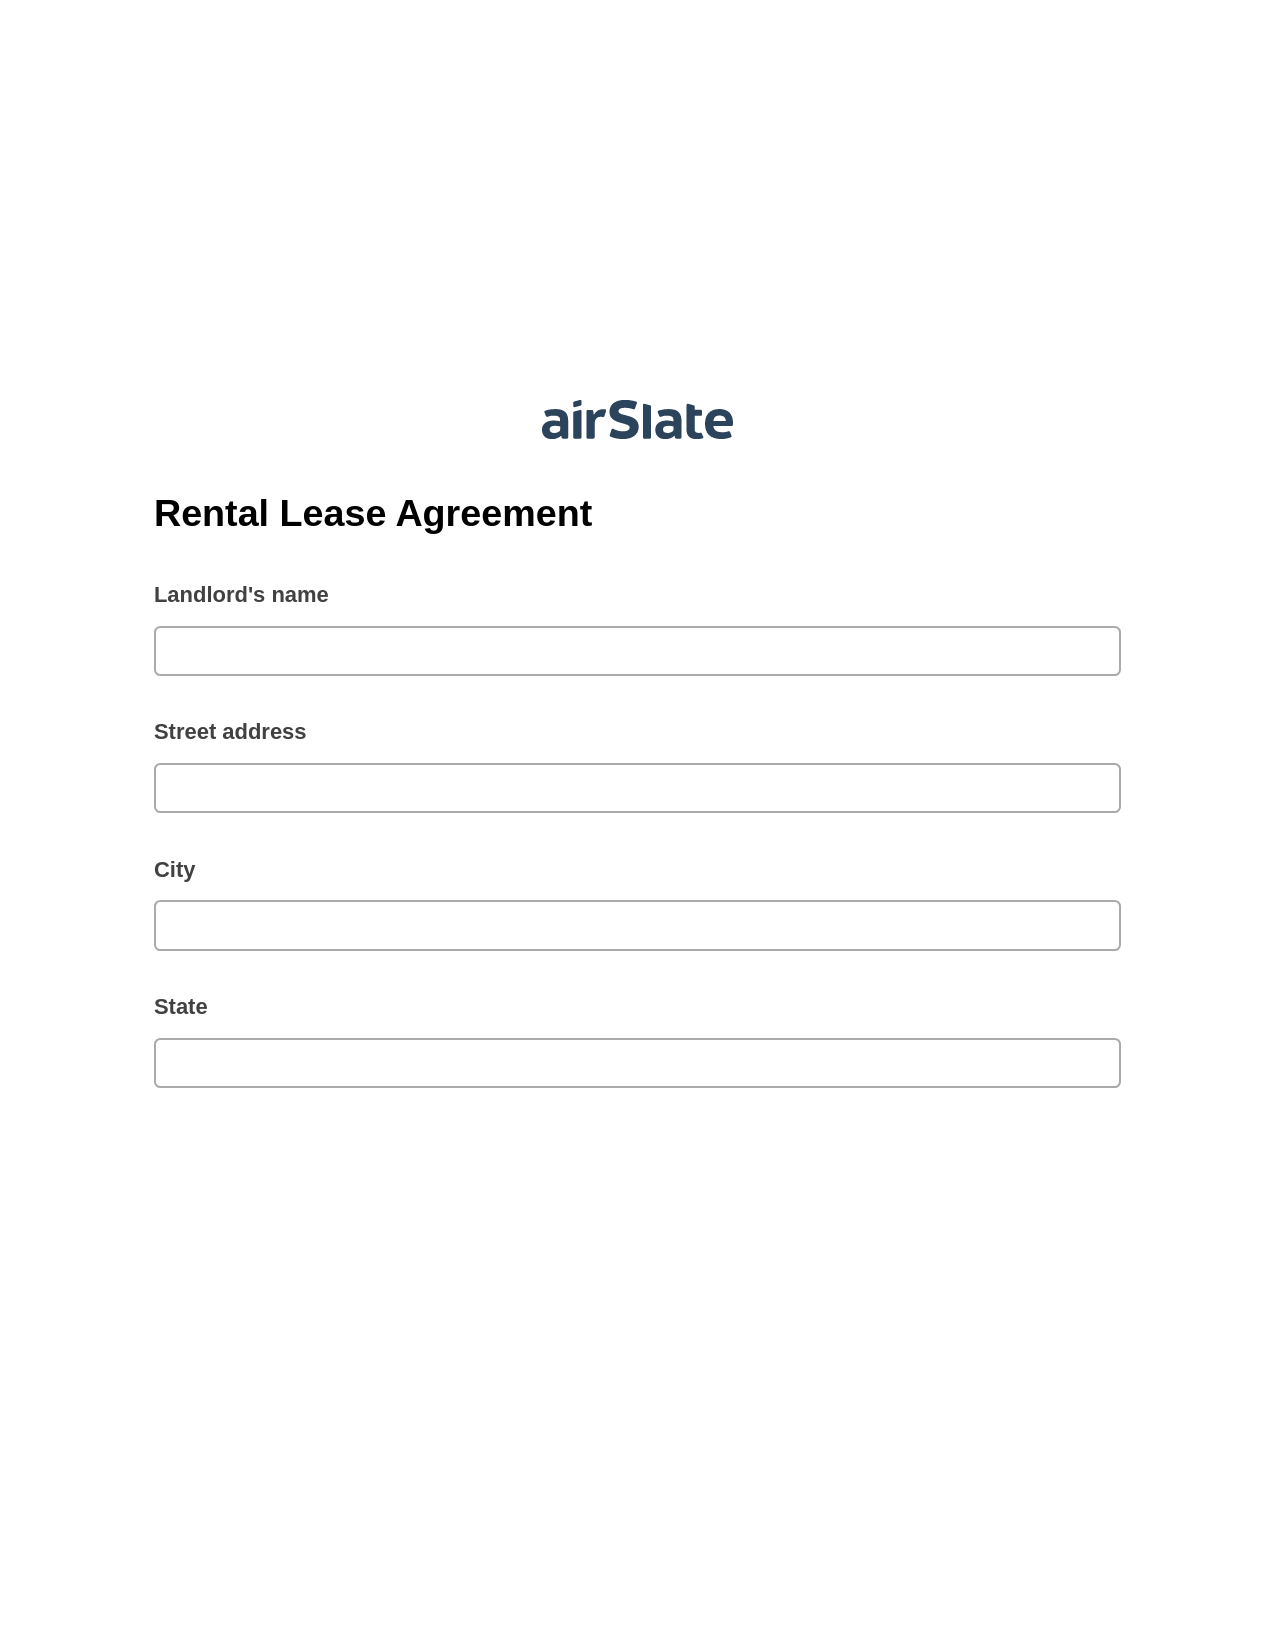 Multirole Rental Lease Agreement Pre-fill from CSV File Bot, Create NetSuite Records Bot, Export to Smartsheet